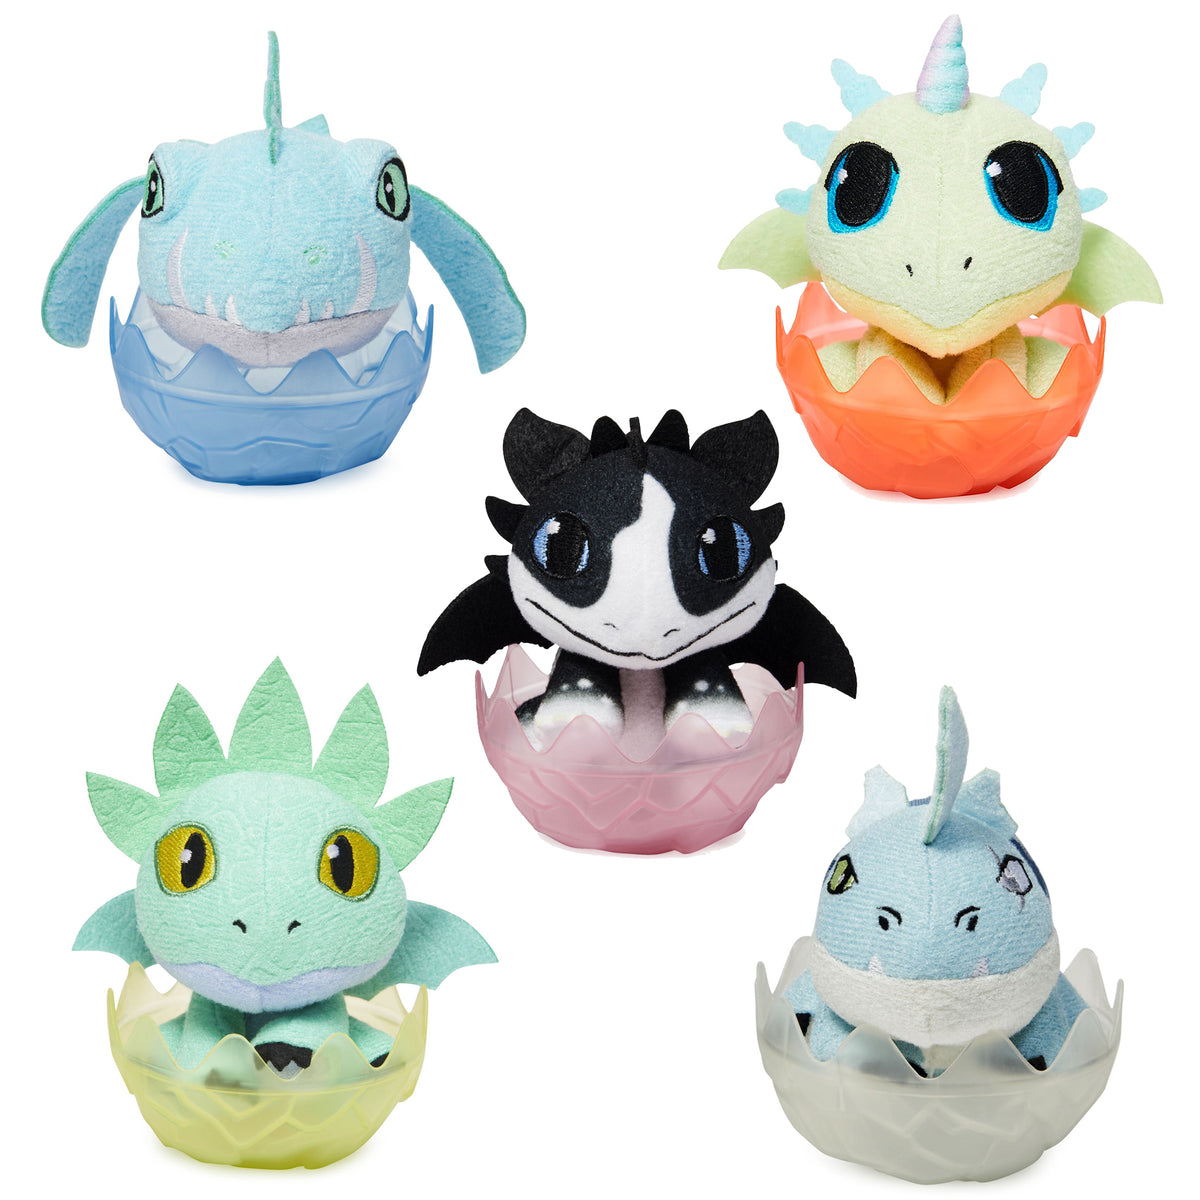 OFFICIAL 12 INCH DRAGONS THE NINE REALMS SOFT PLUSH TOY HOW TO TRAIN YOUR  DRAGON